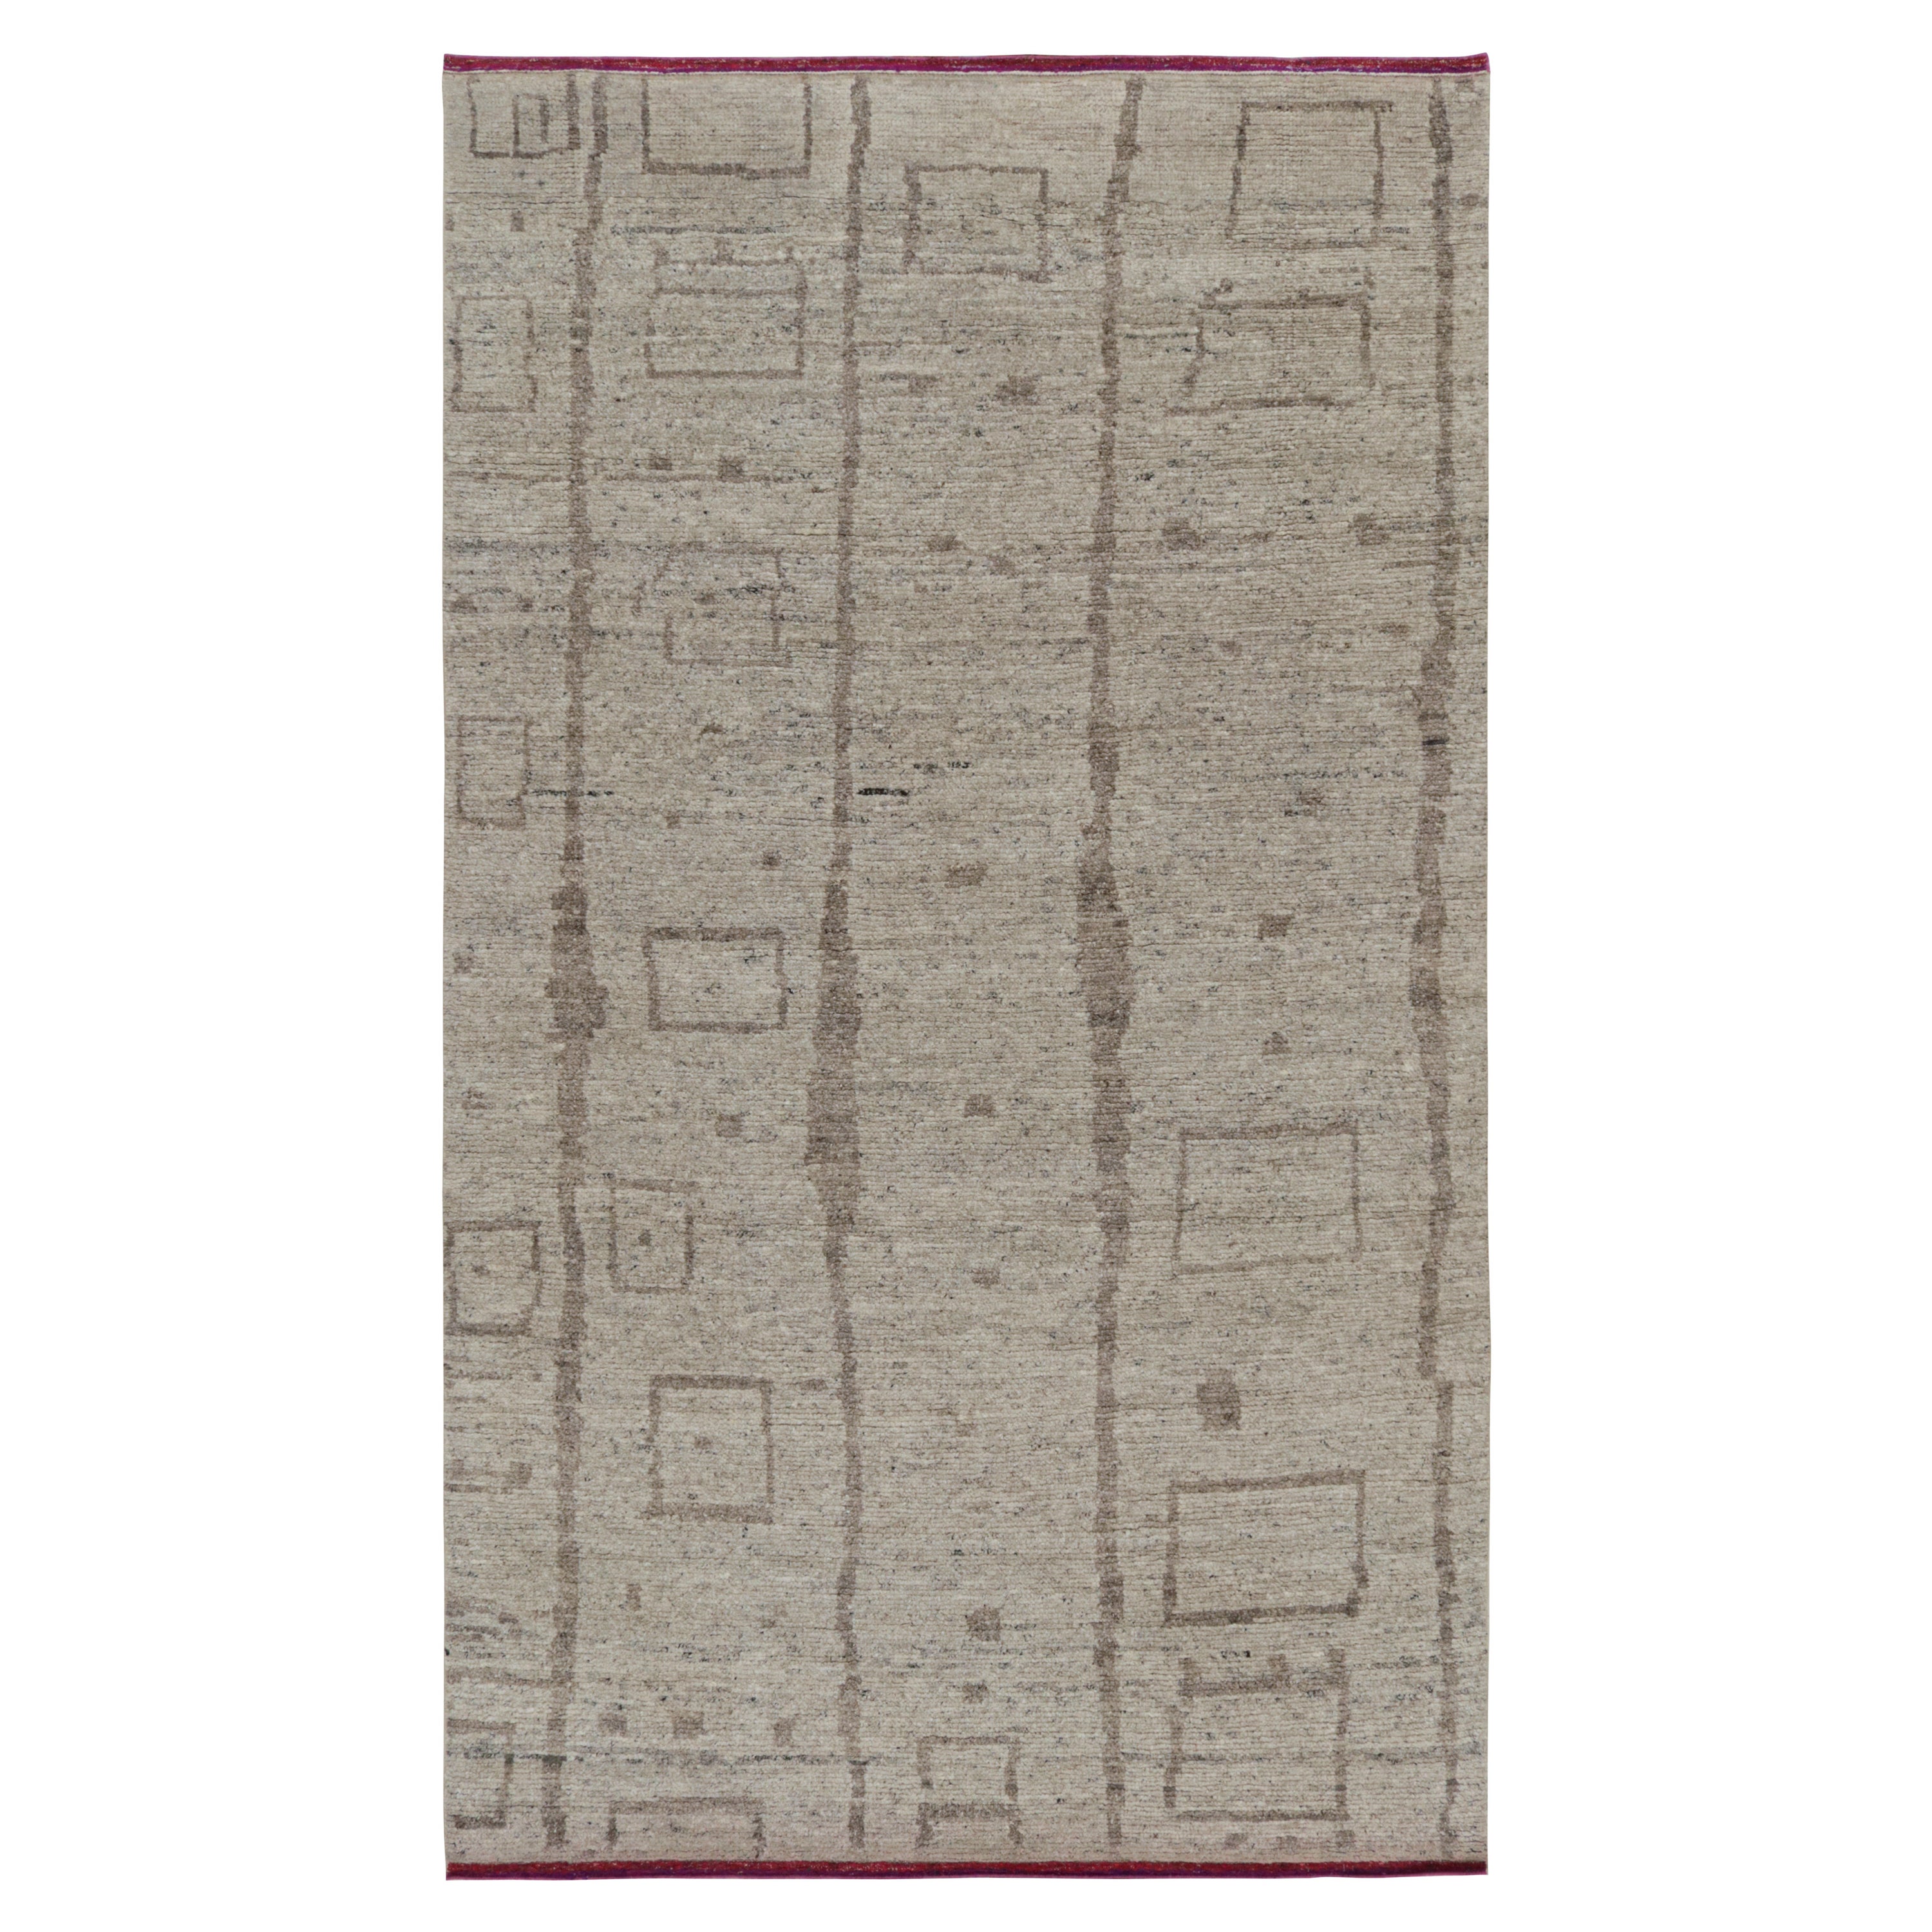 Rug & Kilim’s Modern Moroccan Style Rug with Beige and Gray Geometric Patterns For Sale